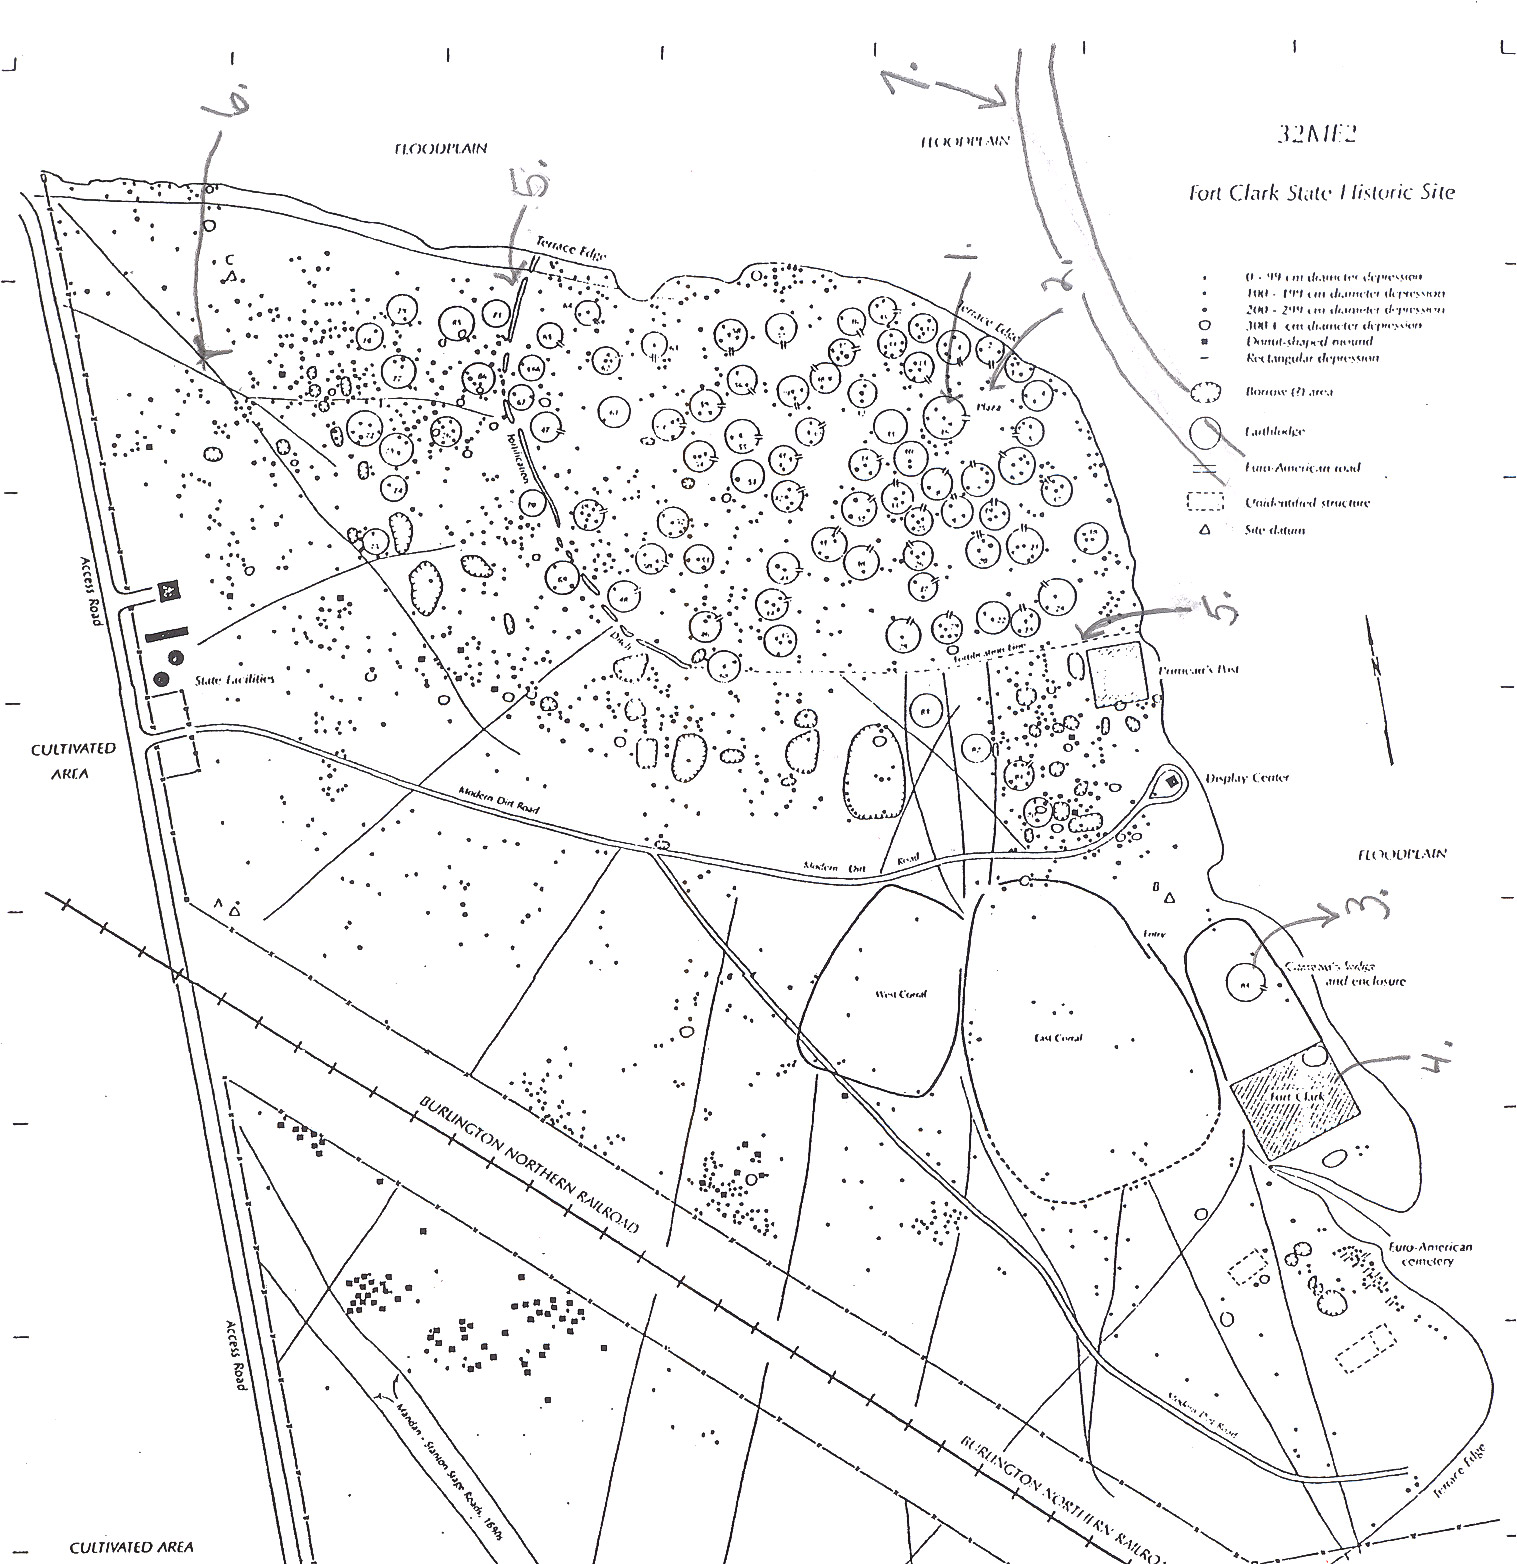 Archaeologist Raymond Wood made this drawing of the remains of Fort Clark and the nearby Mandan village.  In the lower right corner, the shaded rectangle shows the location of Fort Clark.  The small circle just above (north ) was the site of Pierre Garreau’s lodge.  Garreau was the son of a French fur trader and a Mandan woman.  He lived in the Mandan style.  The circles are the sites of lodges in the village.  The village ceremonial lodge (No. 1) and the village plaza (No. 2) were located close to the river bank.  The village, called Mitu’tahakto’s (meh Toot ah hang tosh), was built in 1822 with a palisade wall (No. 5) for protection.  Trails were dug into the earth by travois poles dragging behind horses.  The trails are still visible (No. 6).